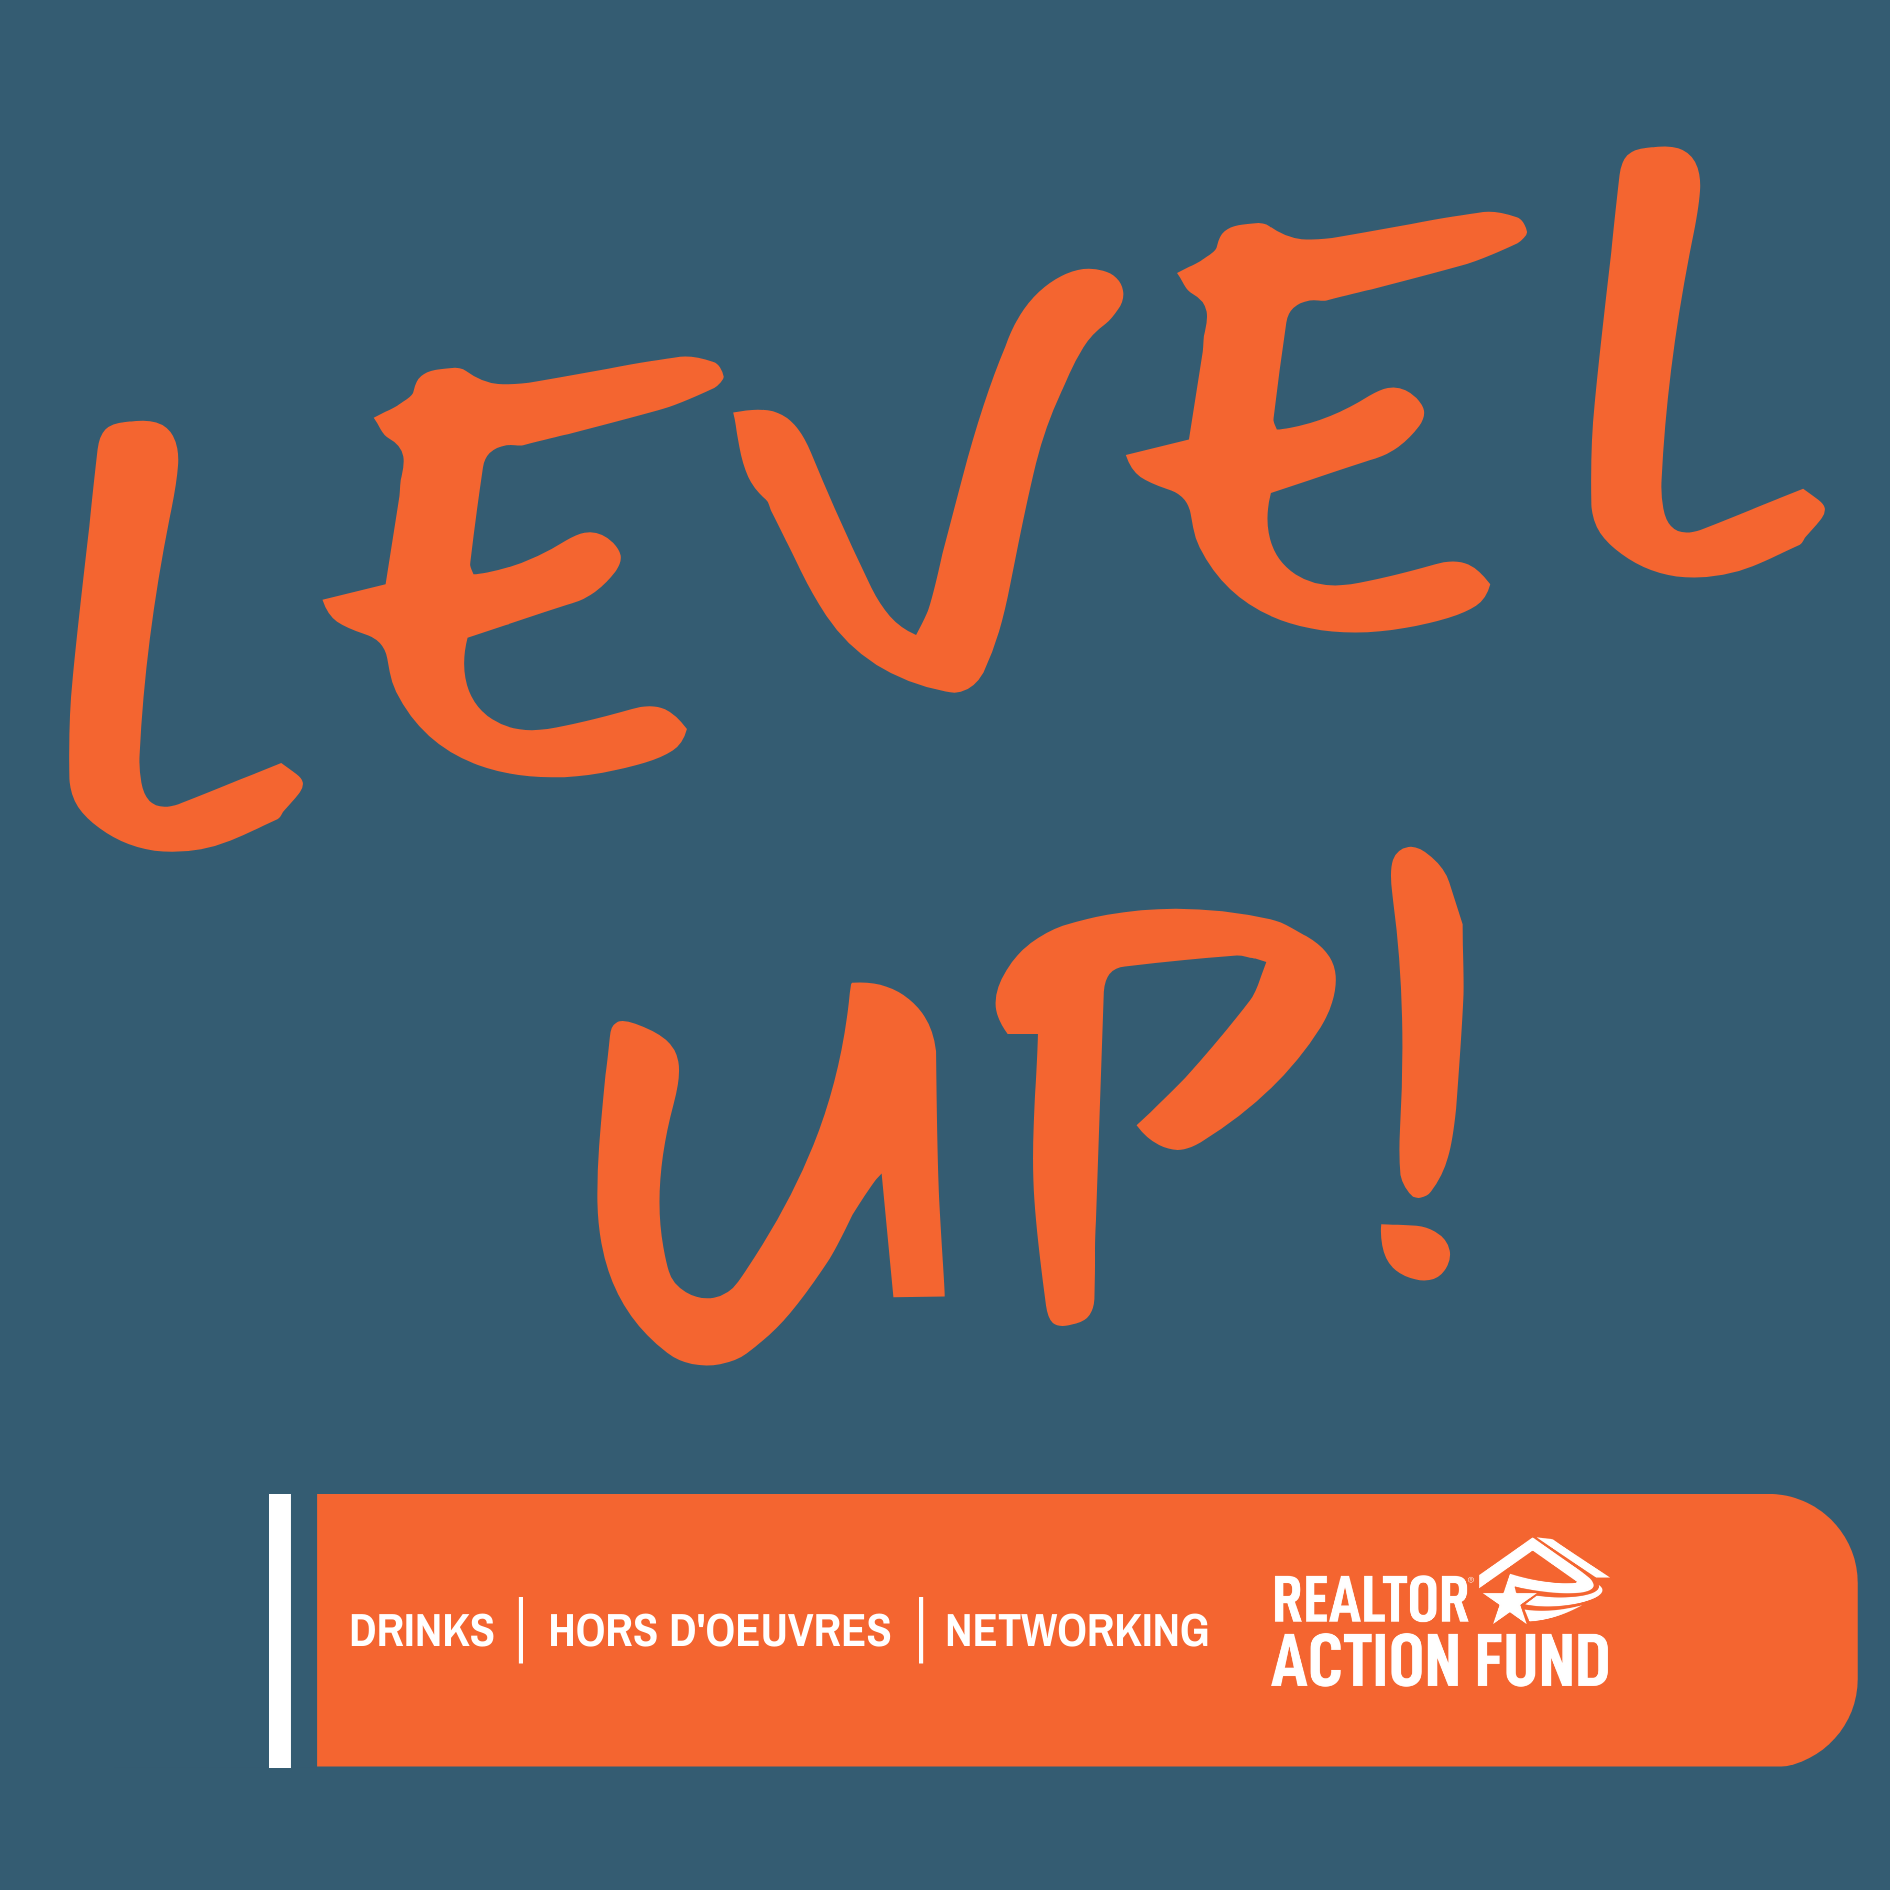 Level Up Realtor Action Fund Event